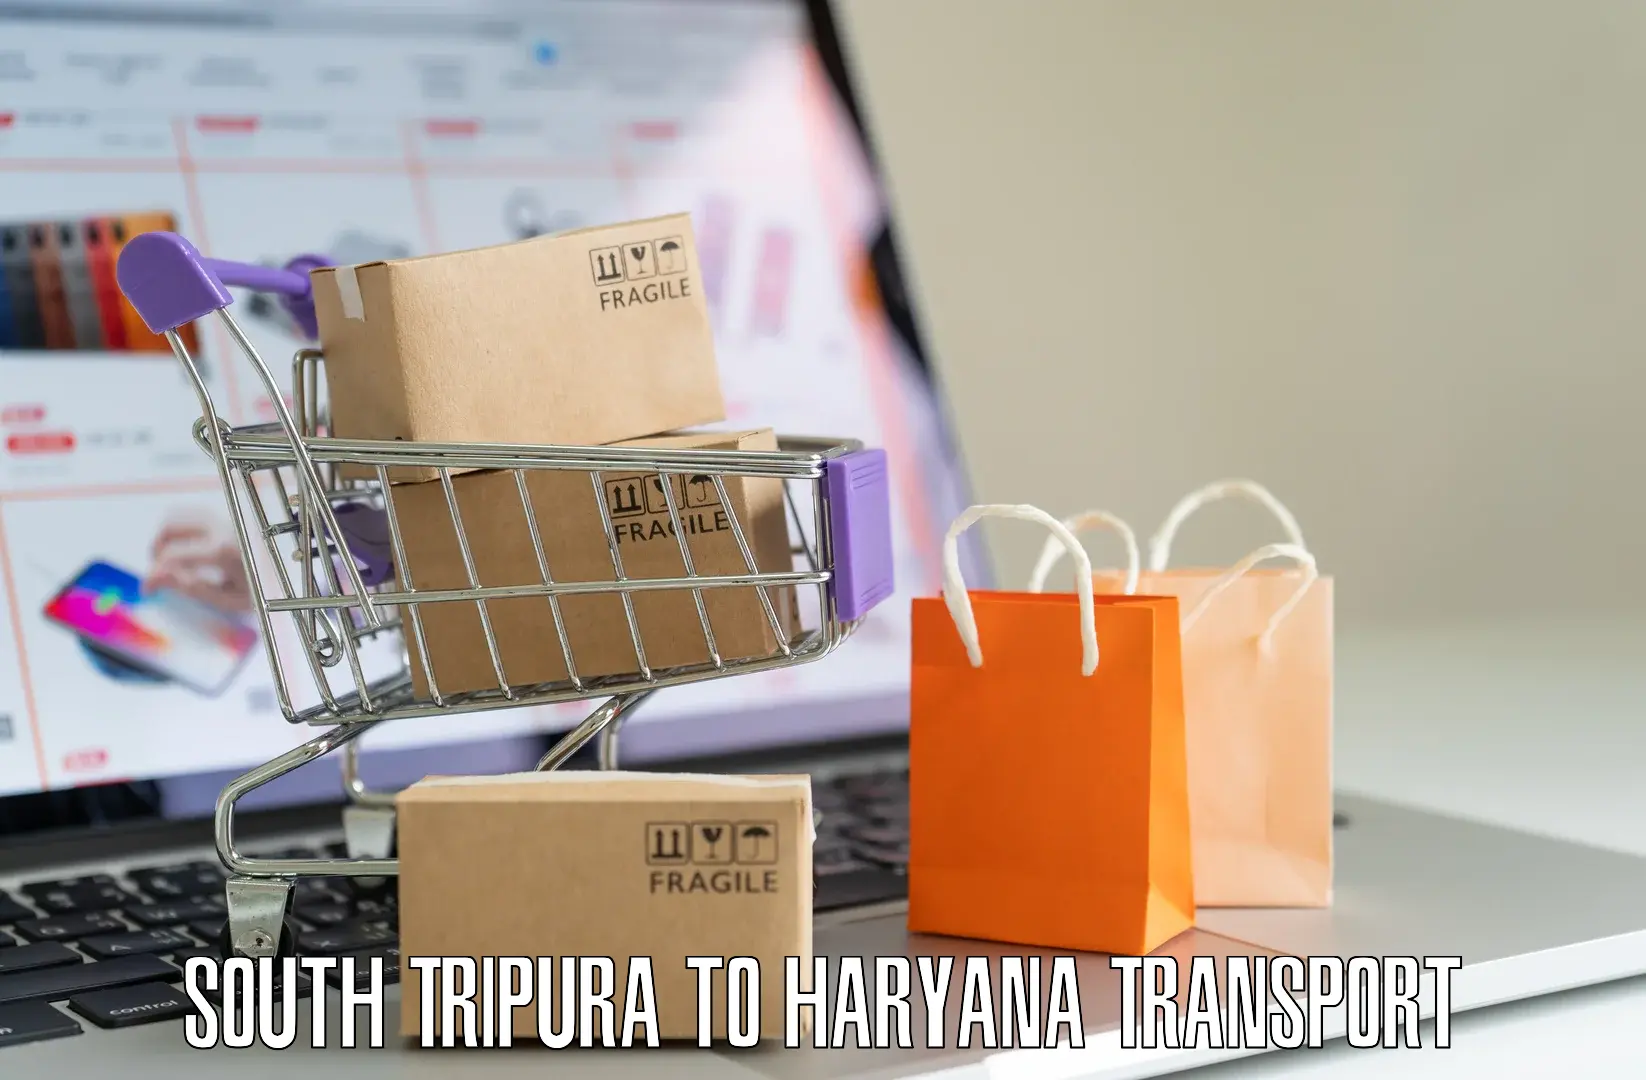 Daily transport service South Tripura to Palwal